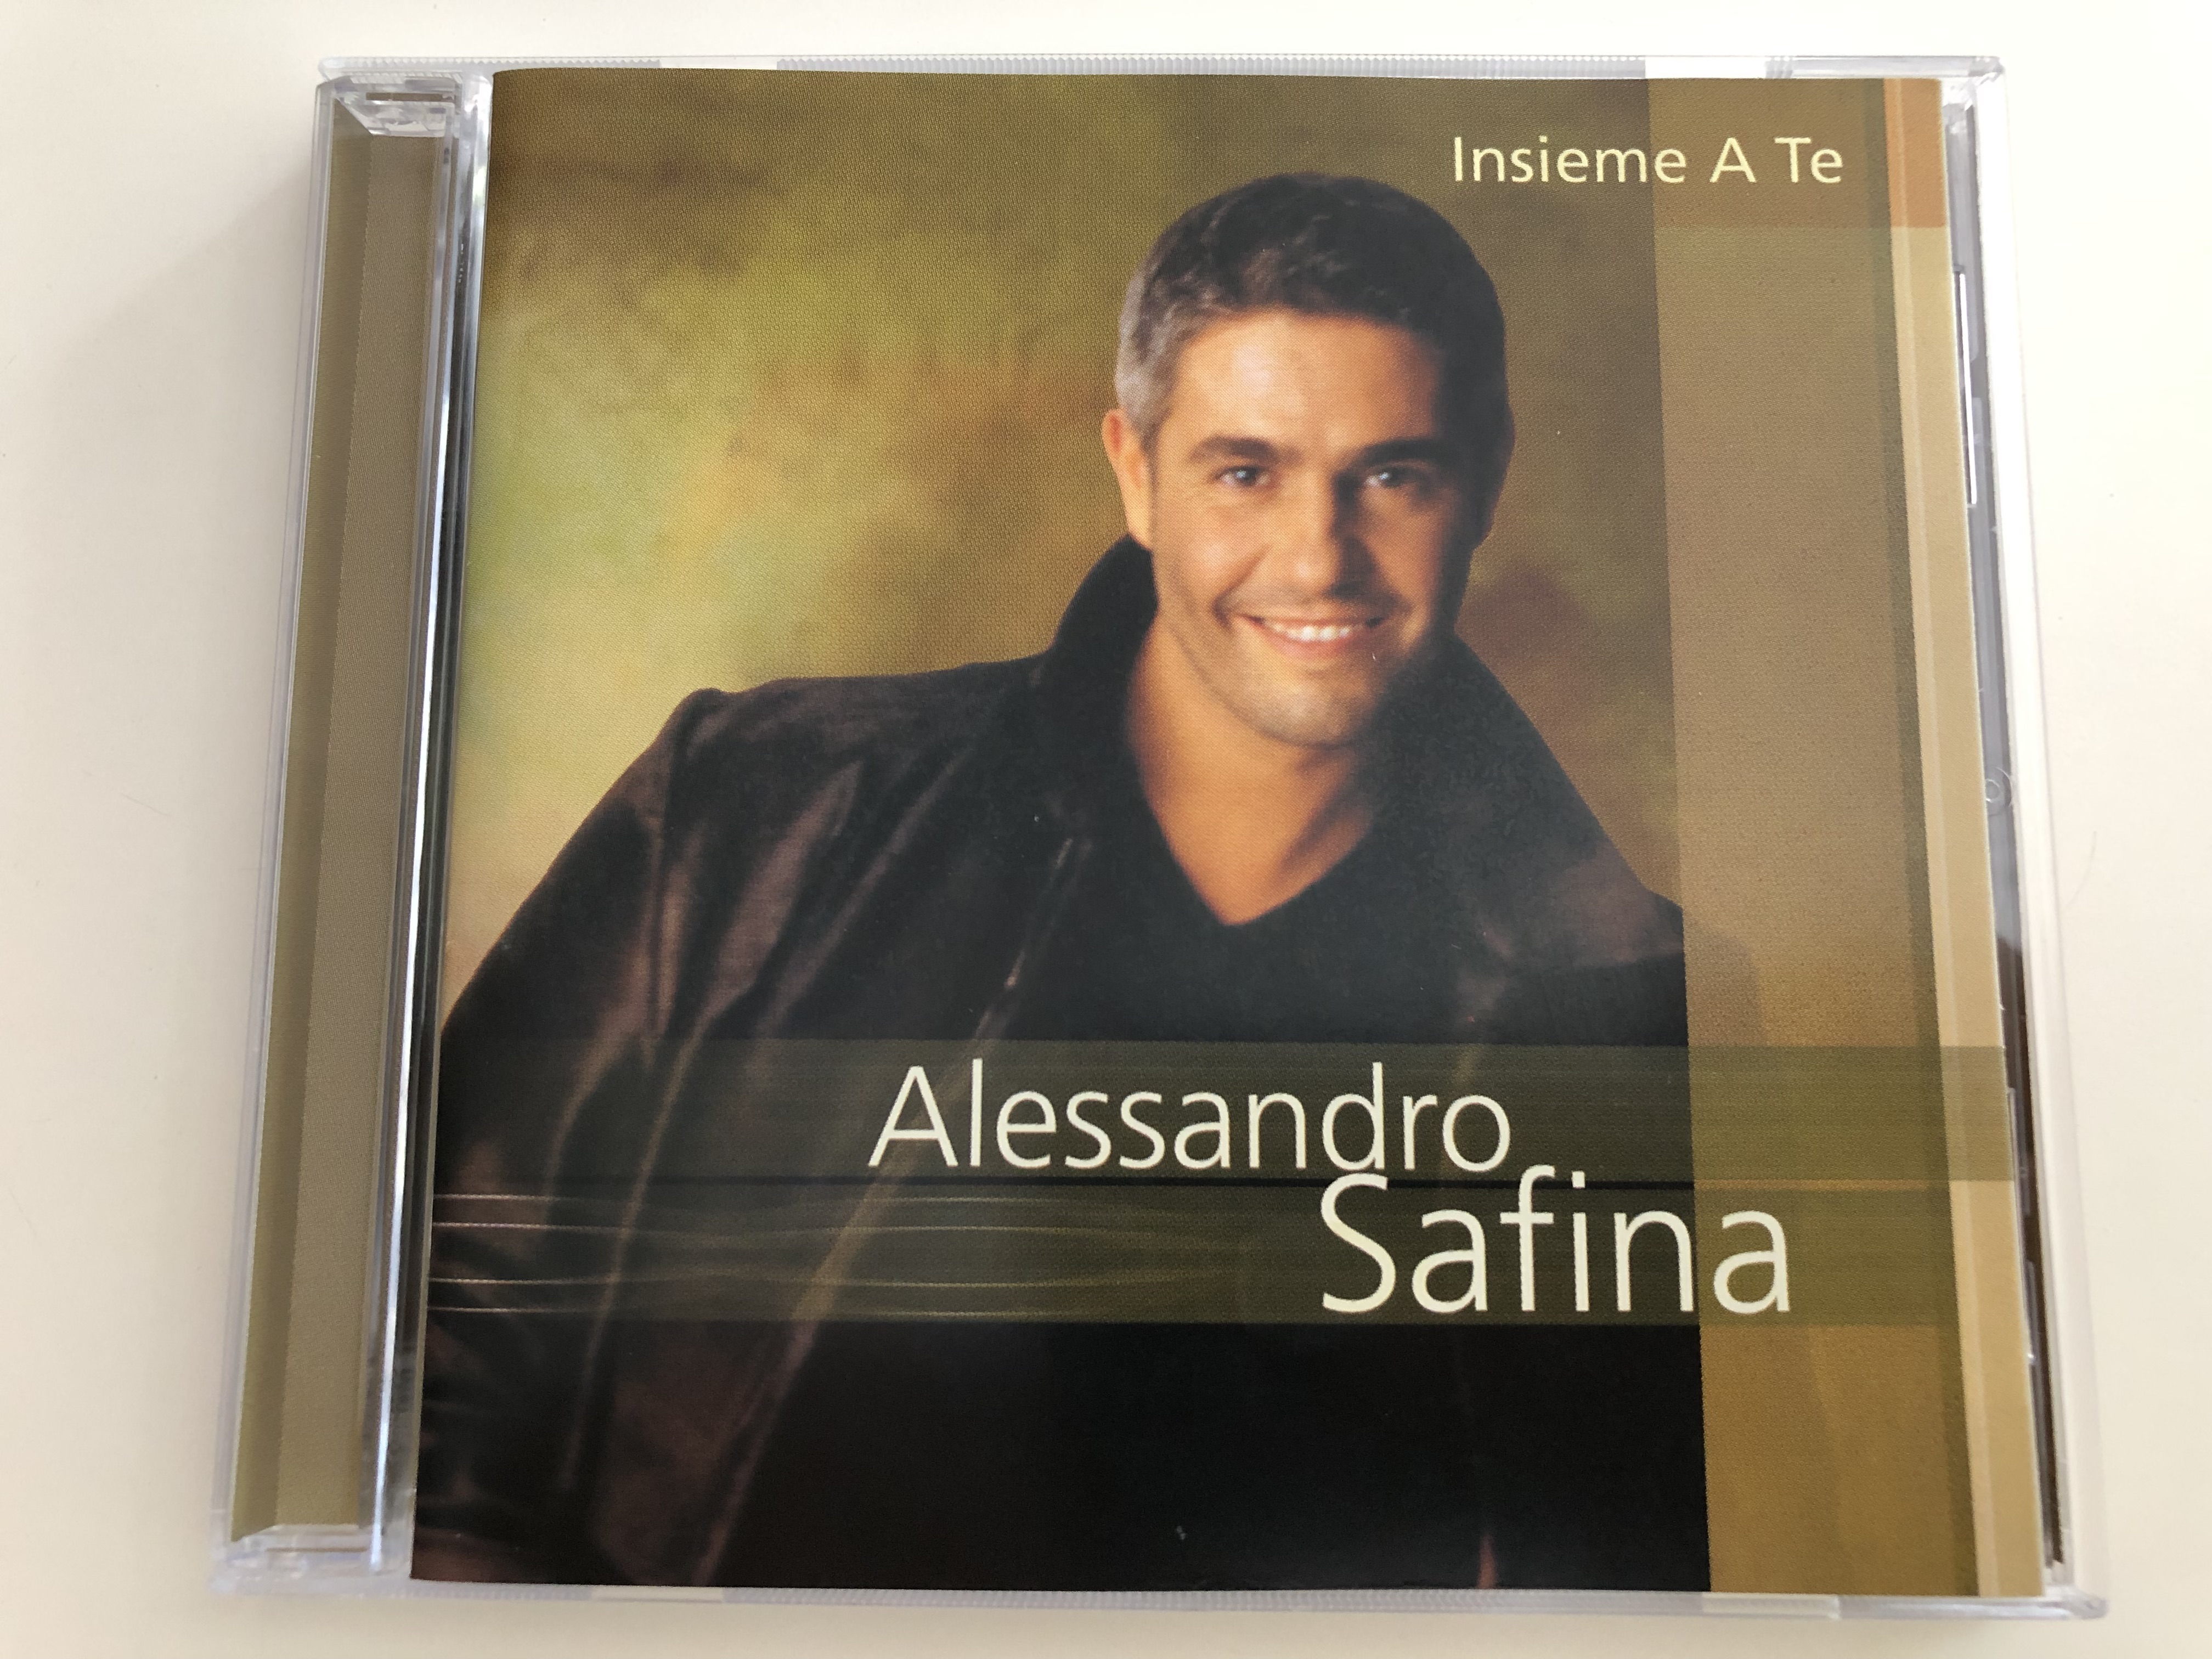 -alessandro-safina-insieme-a-te-strings-orchestra-di-roma-directed-by-romano-musumarra-audio-cd-2001-with-multimedio-track013-378-2-1-.jpg